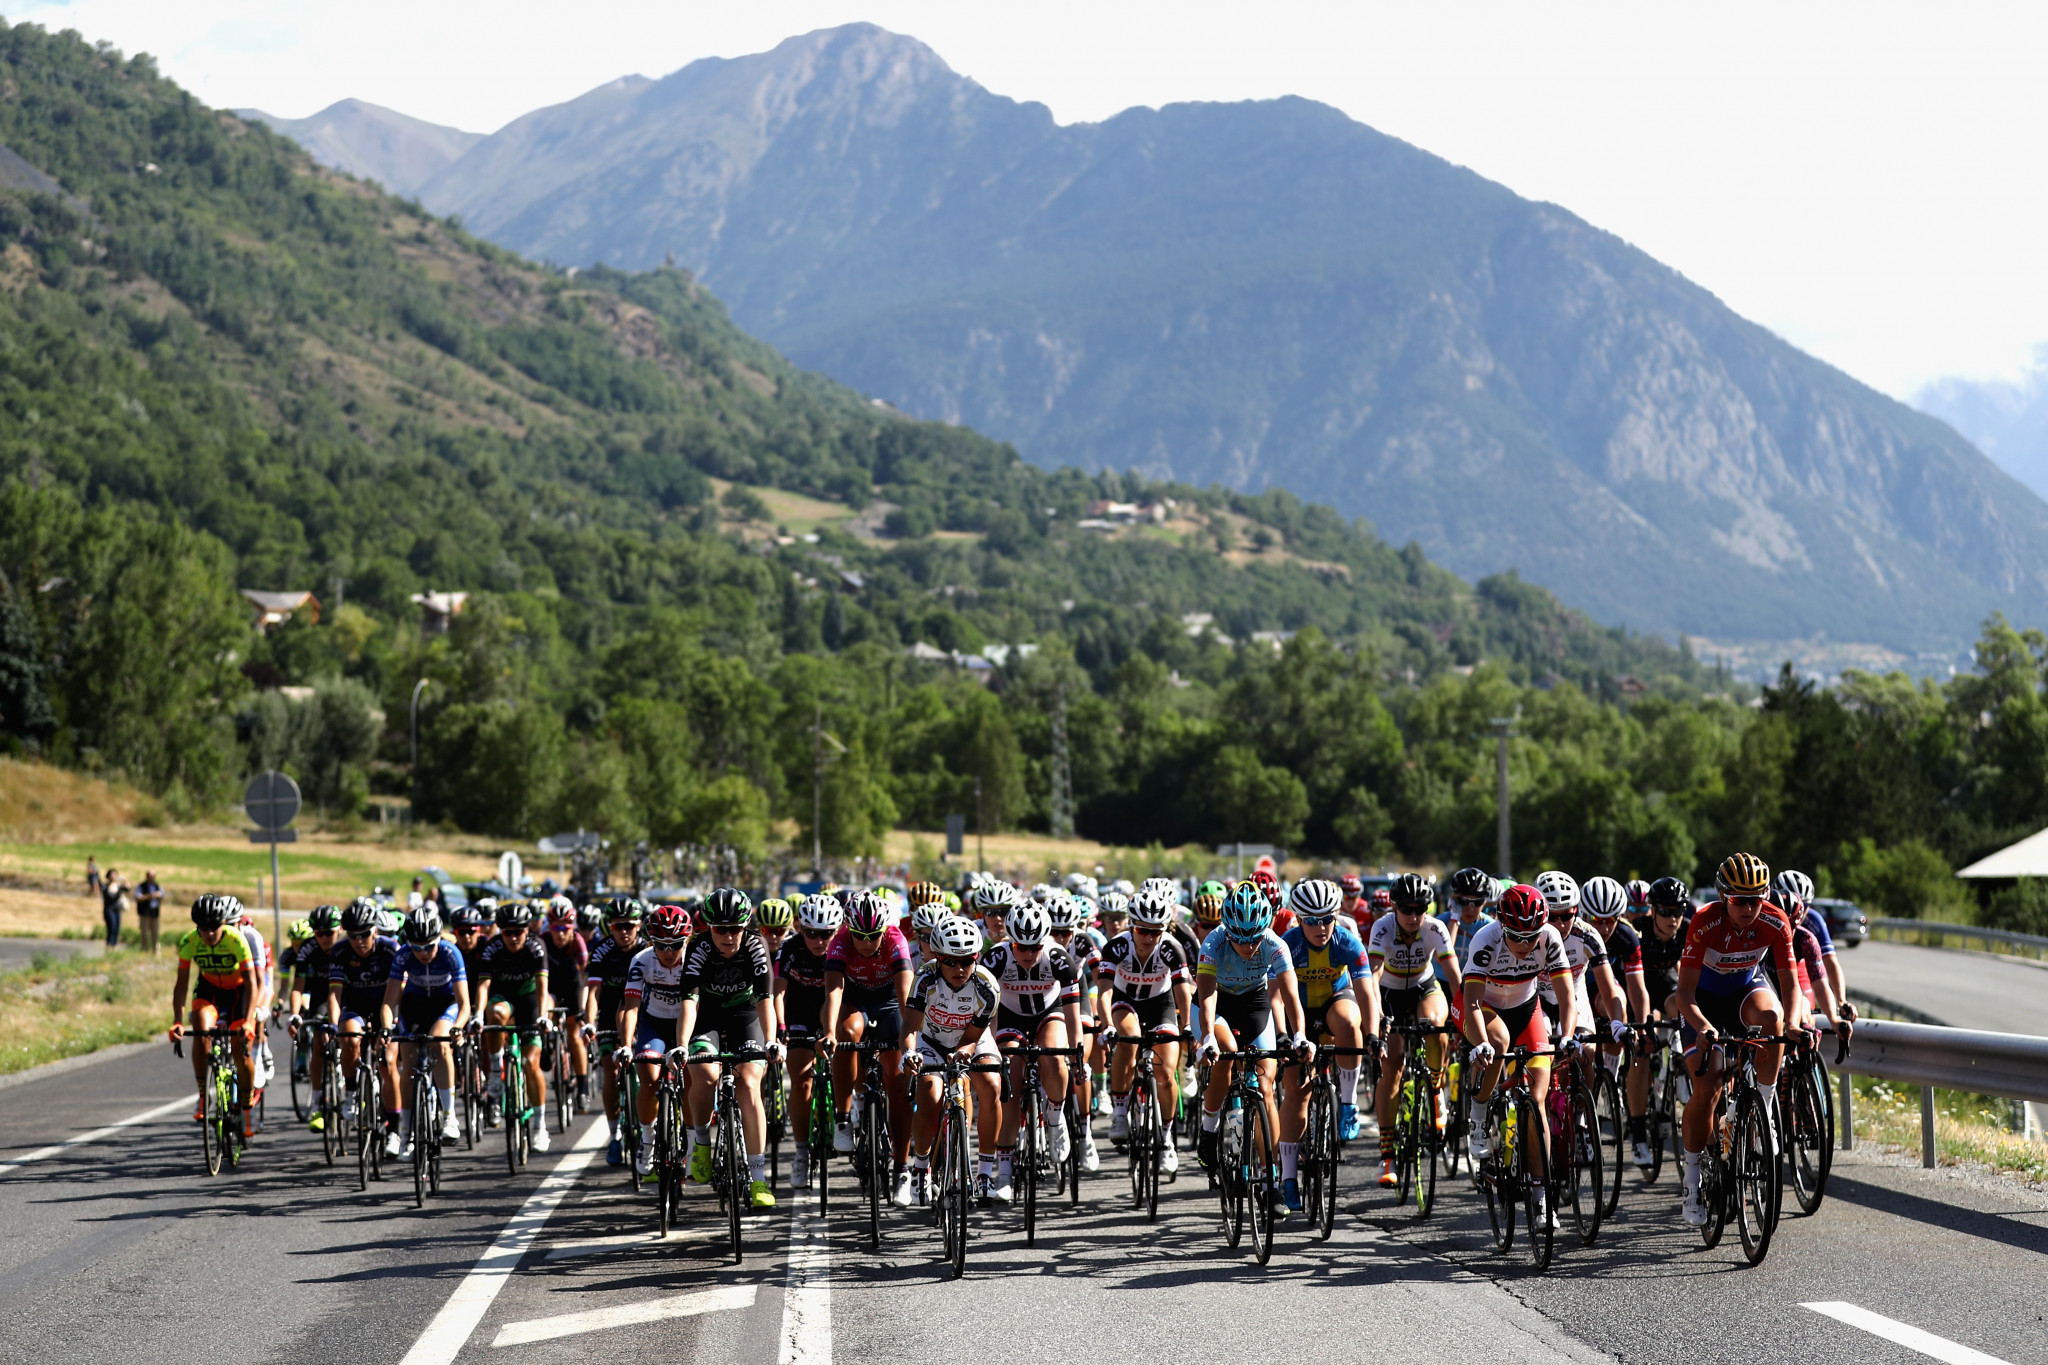 Riders to tackle climber friendly route on one-day La Course by the Tour de France